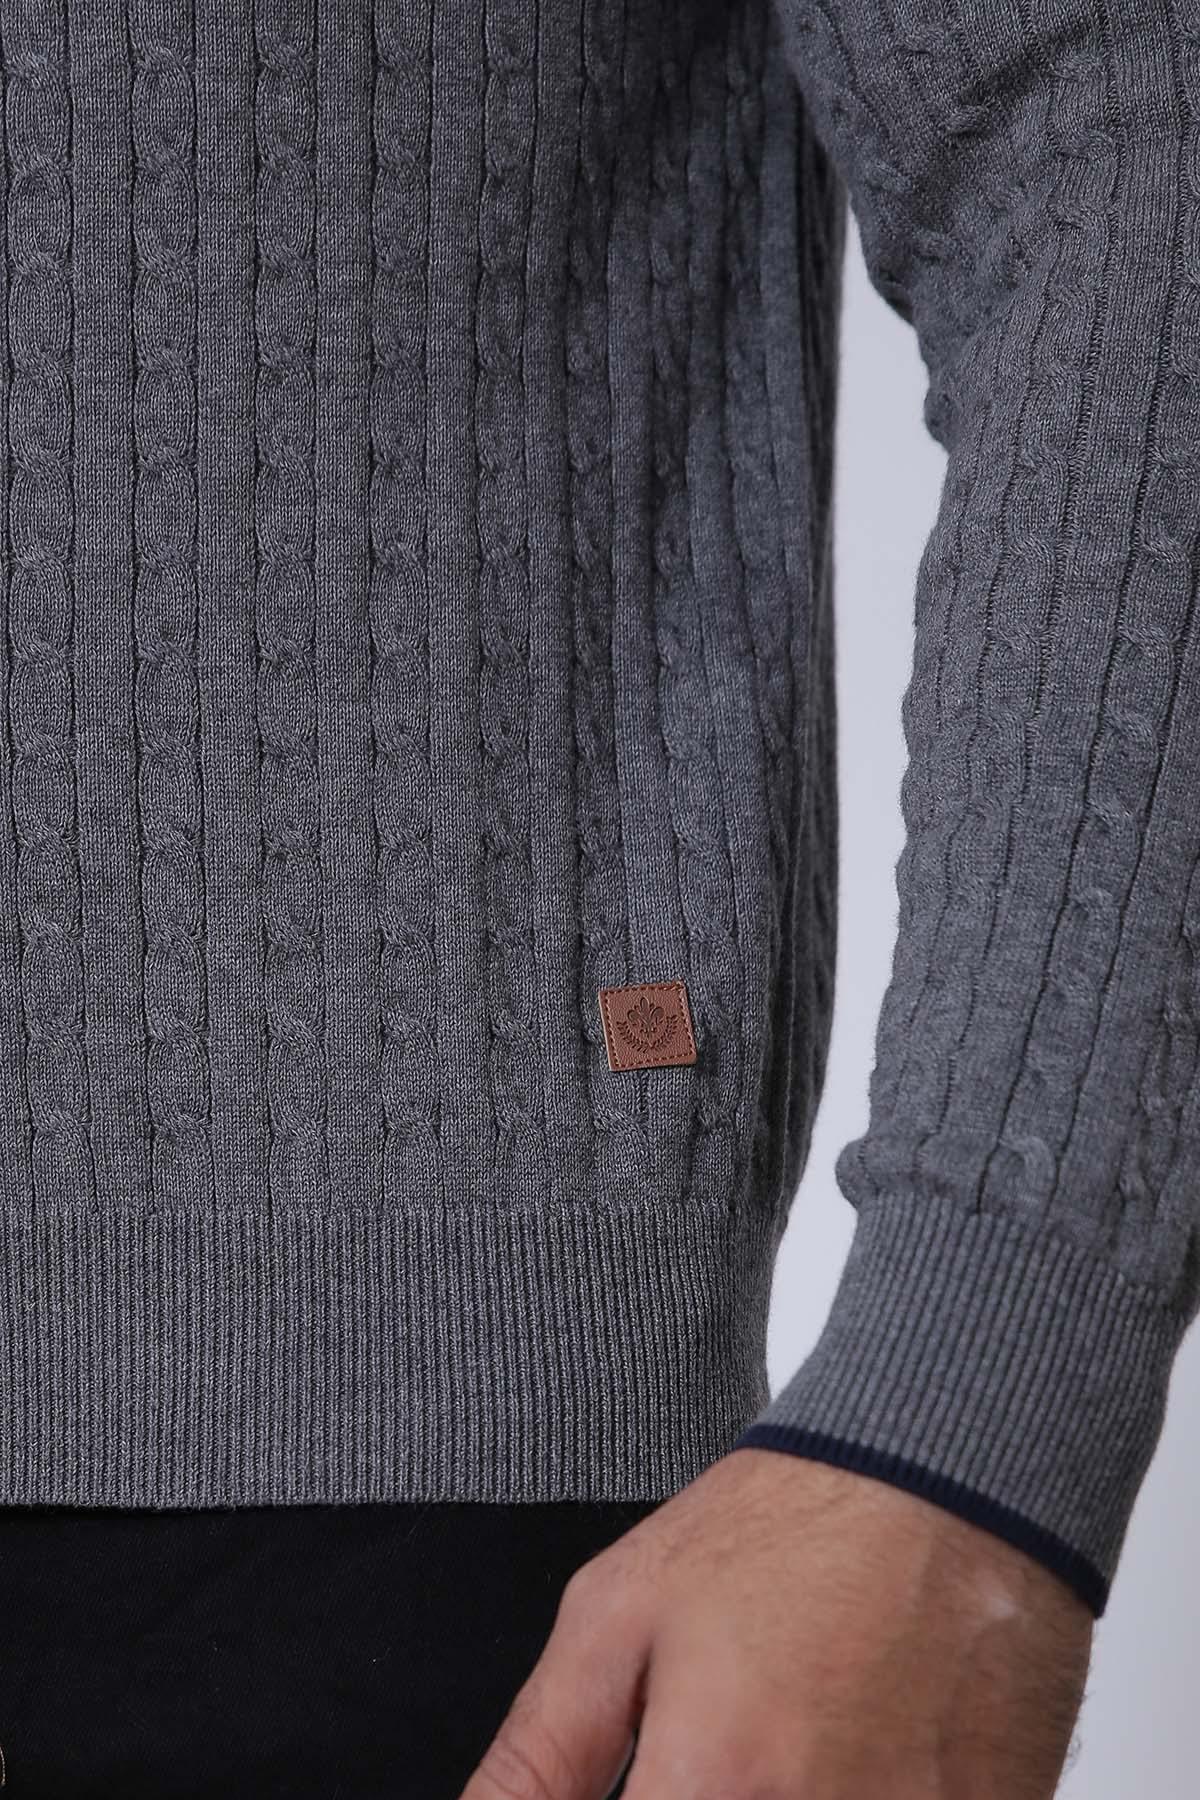 SWEATER ZIPPER FULL SLEEVE GREY at Charcoal Clothing